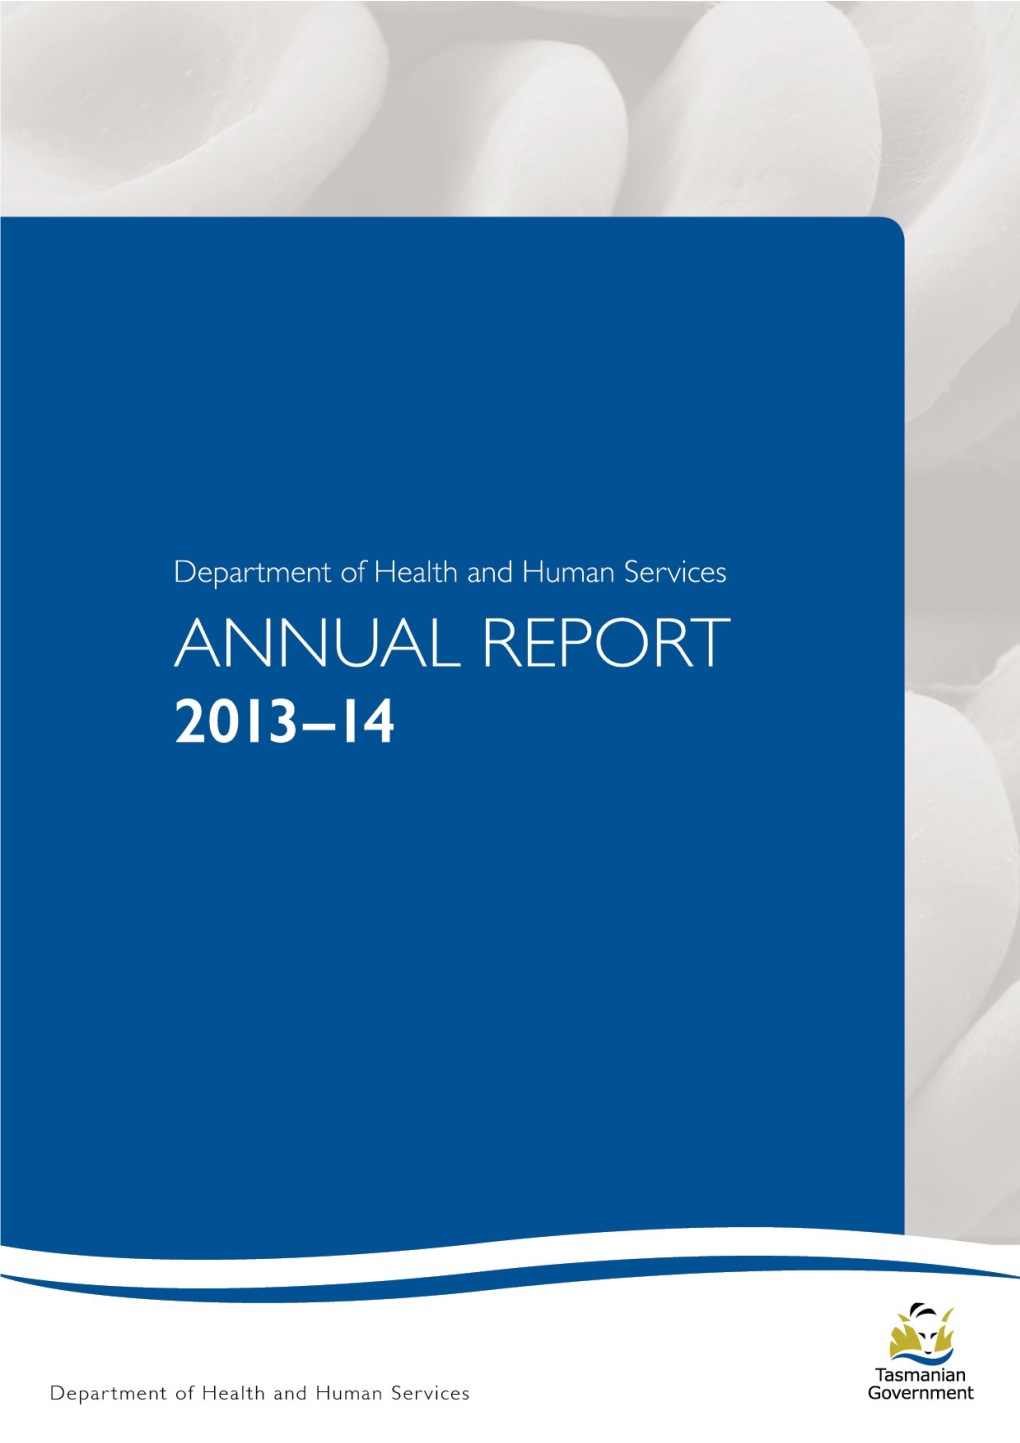 Department of Health and Human Services Annual Report 2013-14